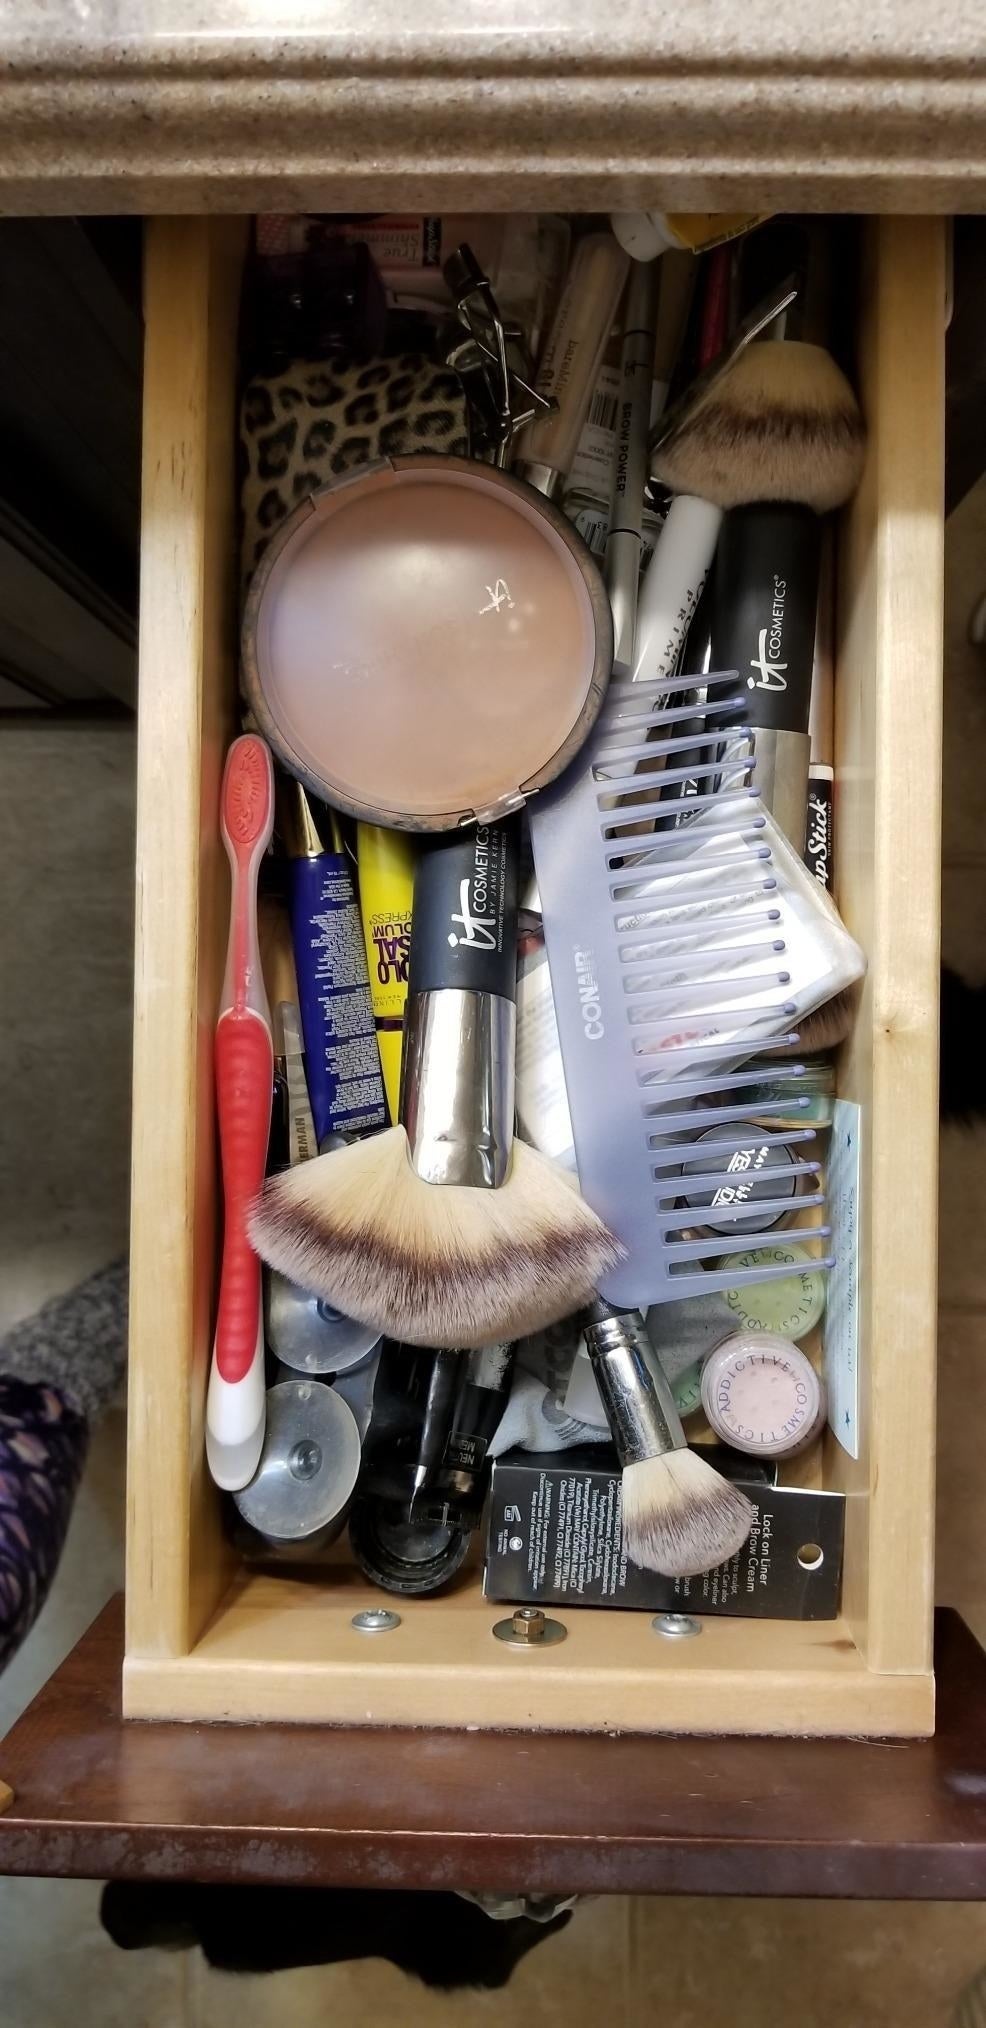 Bathroom Organization: Makeup, Hair Products, Lotions, and Everything Else!  — Chaos Organizing